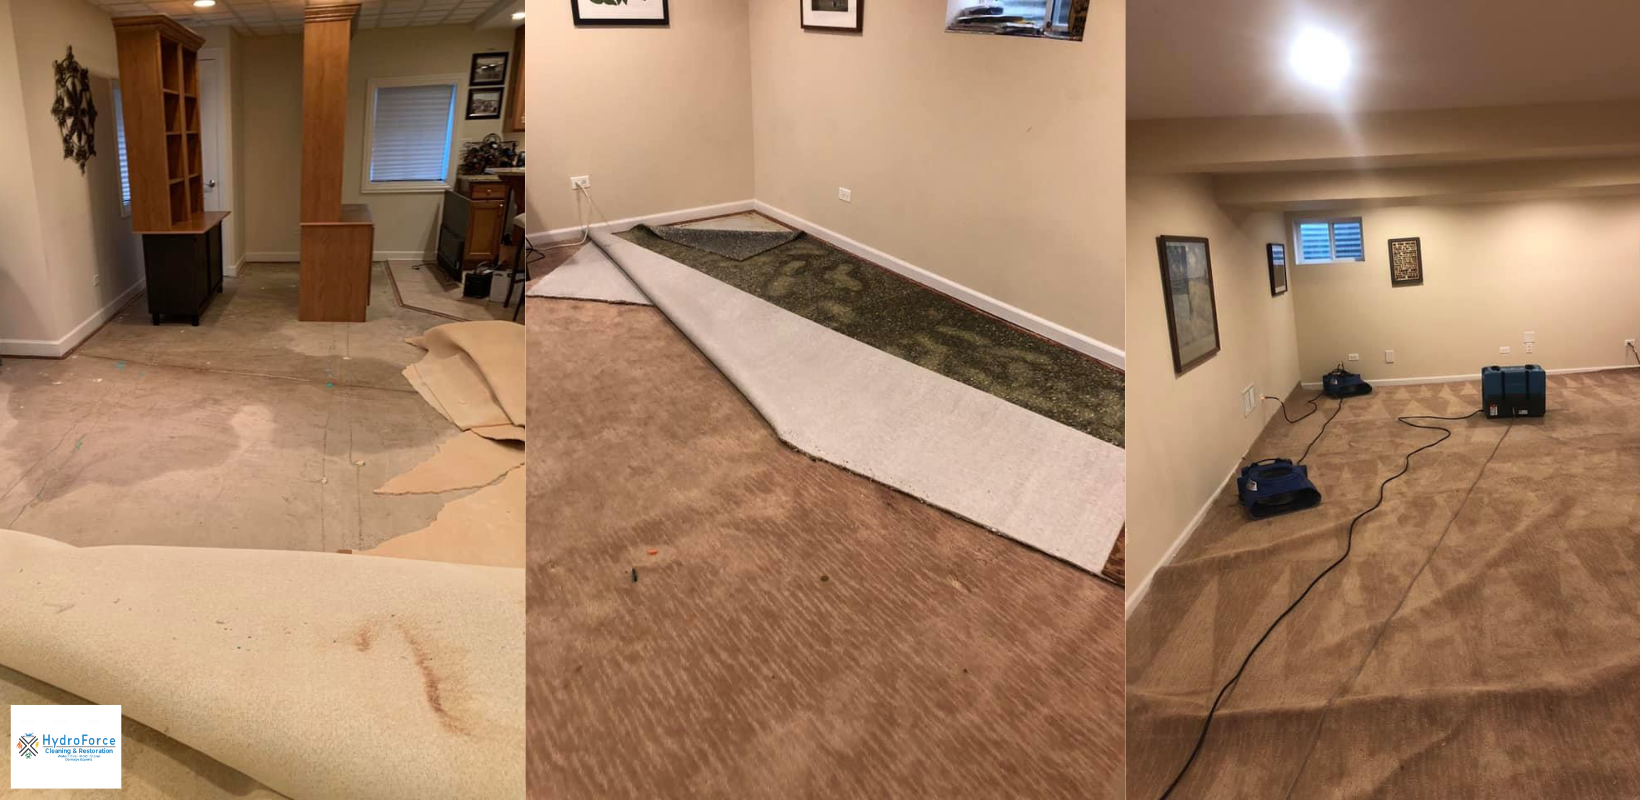 How to Tell If Your Carpets Have Been Affected By Mold? 